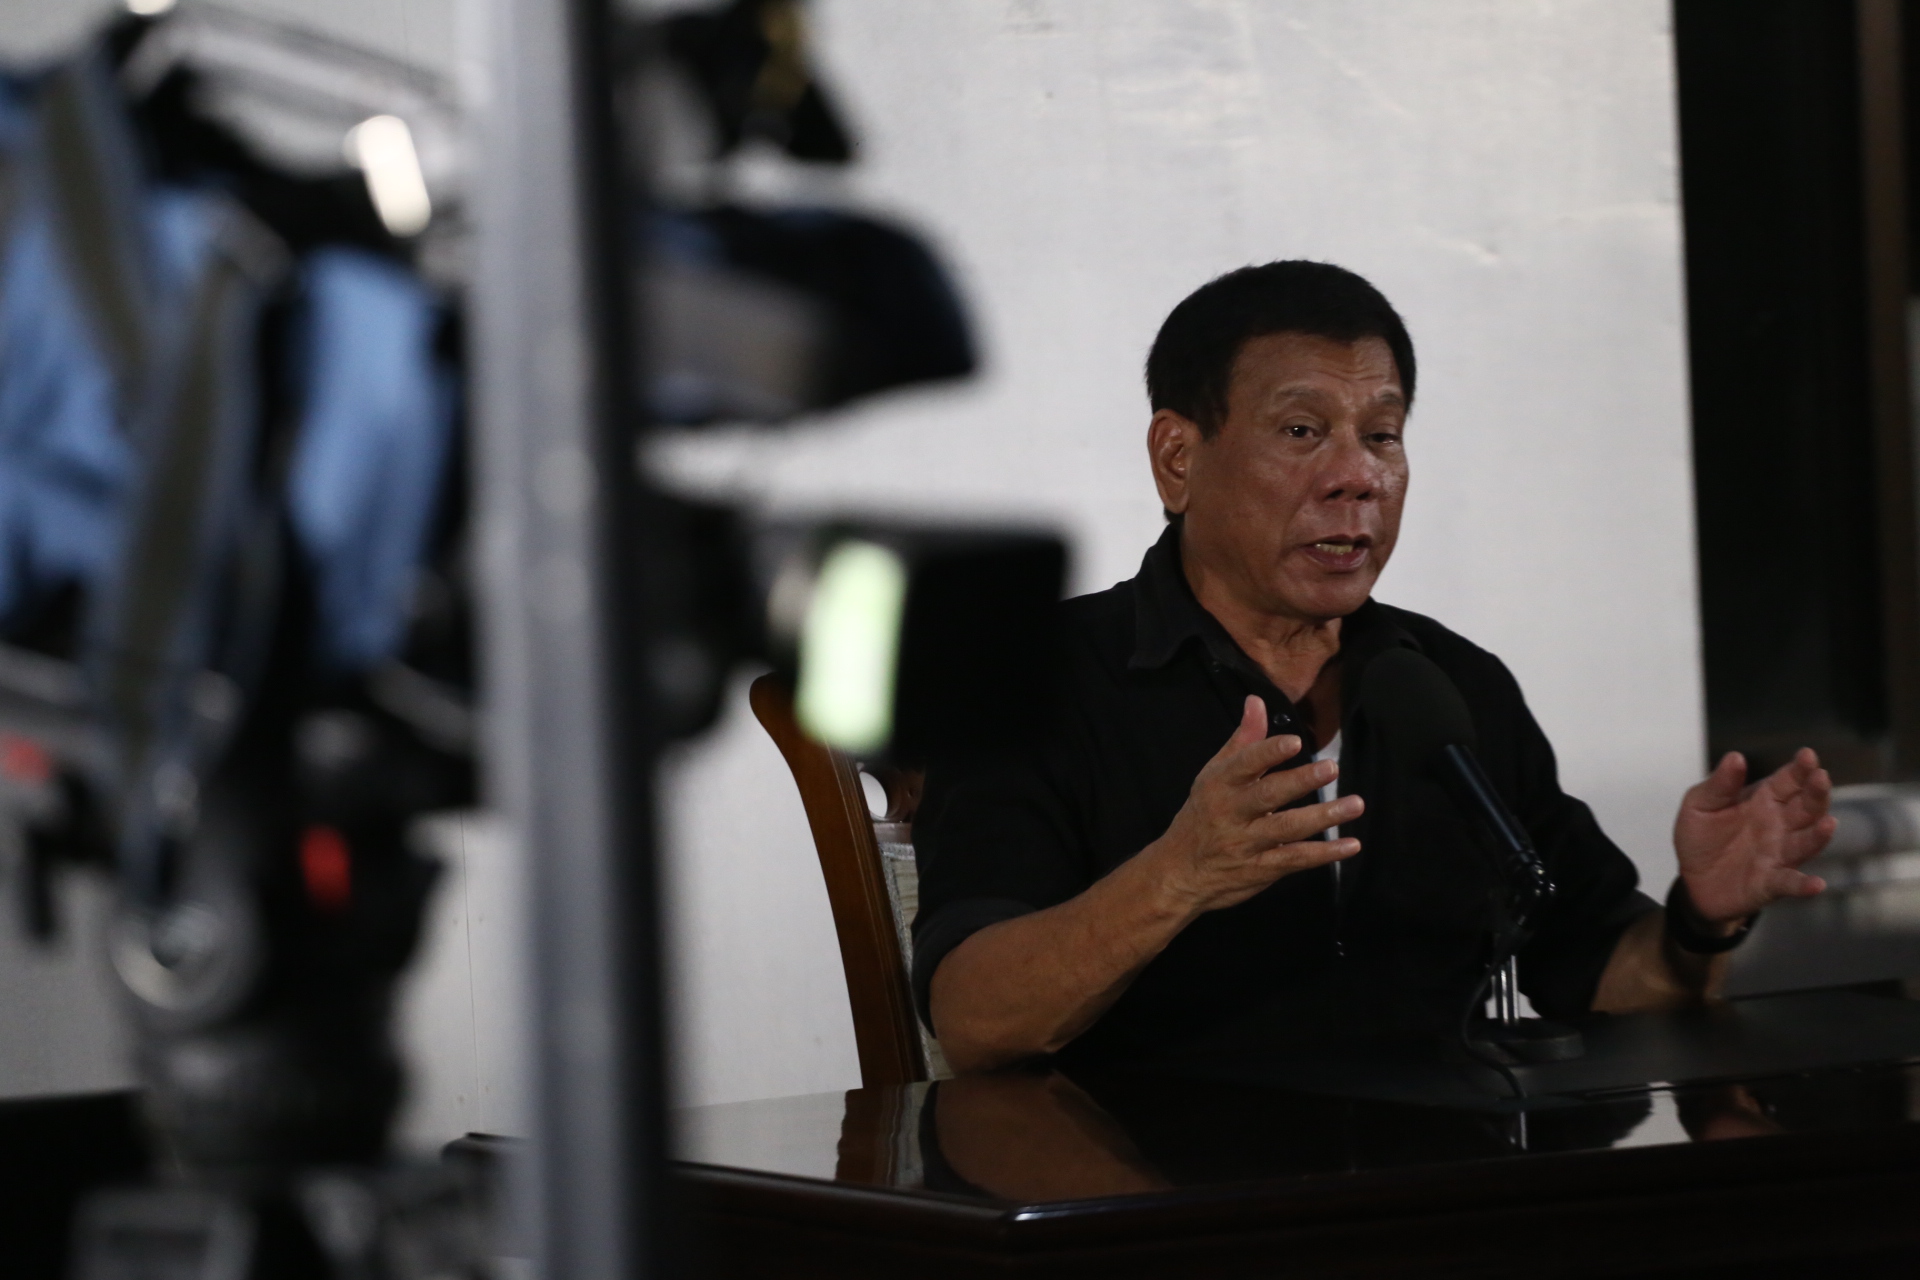 DUTERTE AND MEDIA. Duterte holds a media briefing at the Presidential Guesthouse at DPWH Depot Compound, Panacan, Davao City. Photo by Manman Dejeto/Rappler 